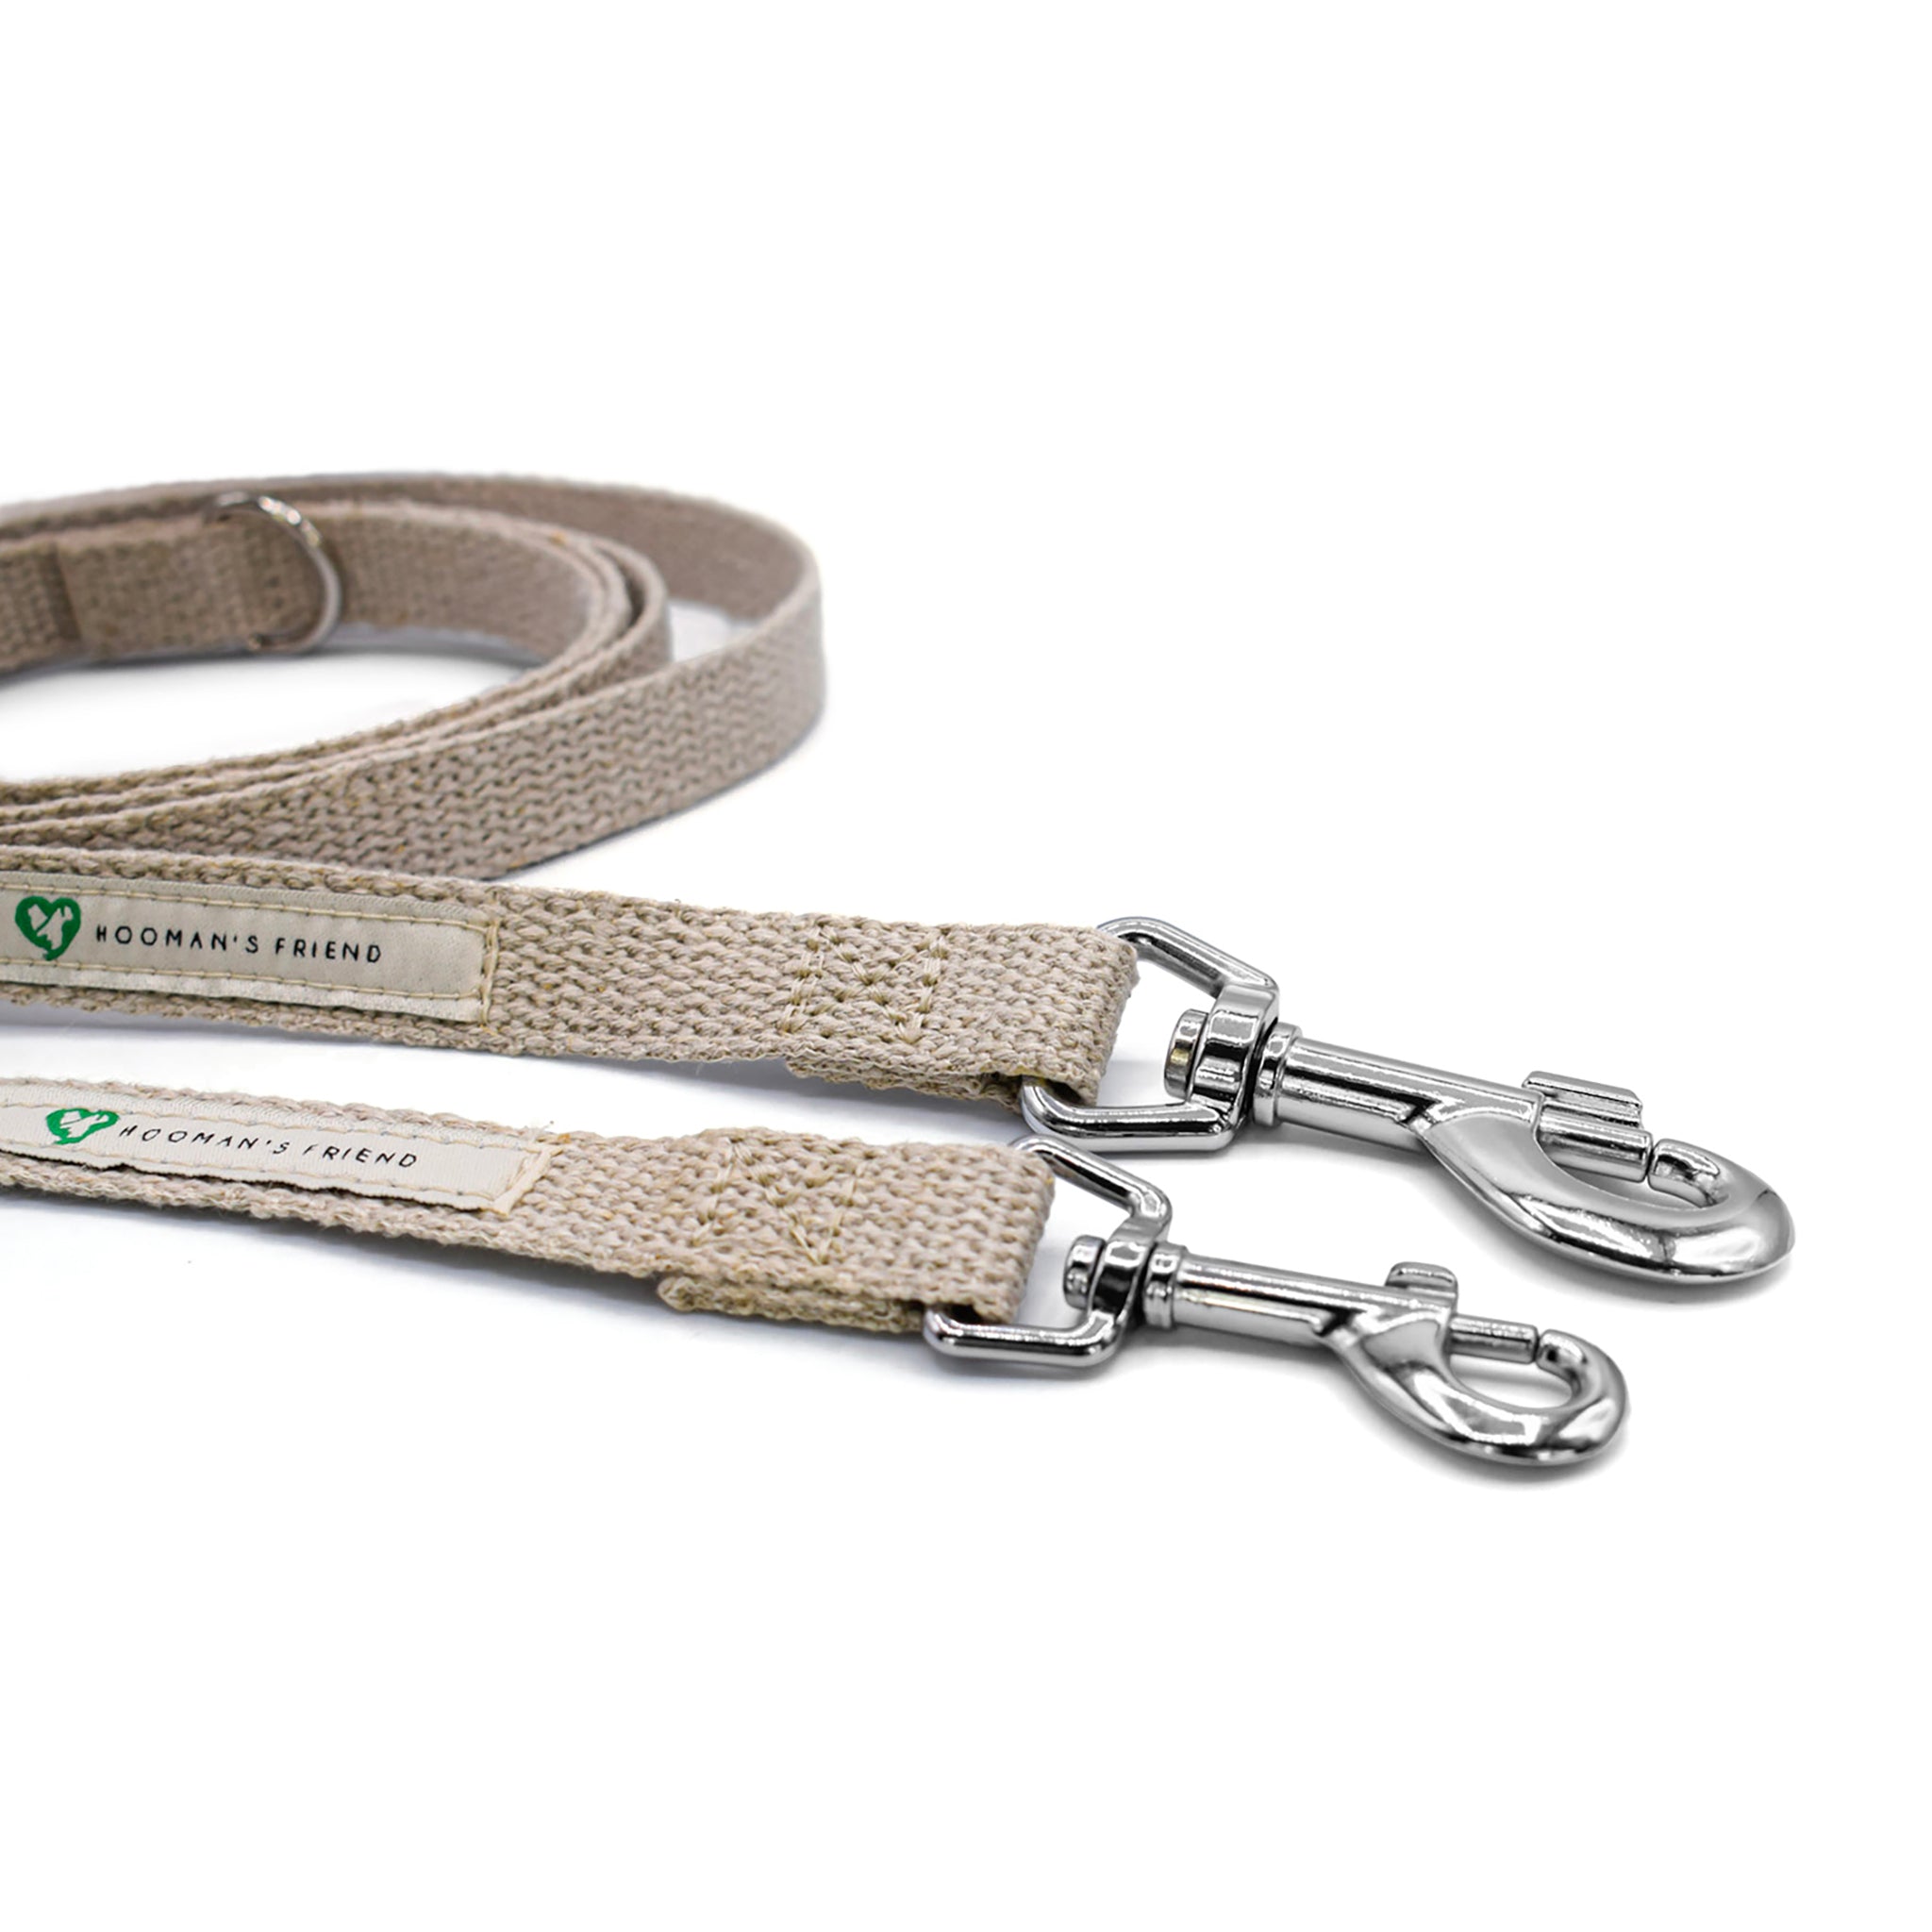 Hooman's Friend Hemp Dog Lead with large and small size clasp